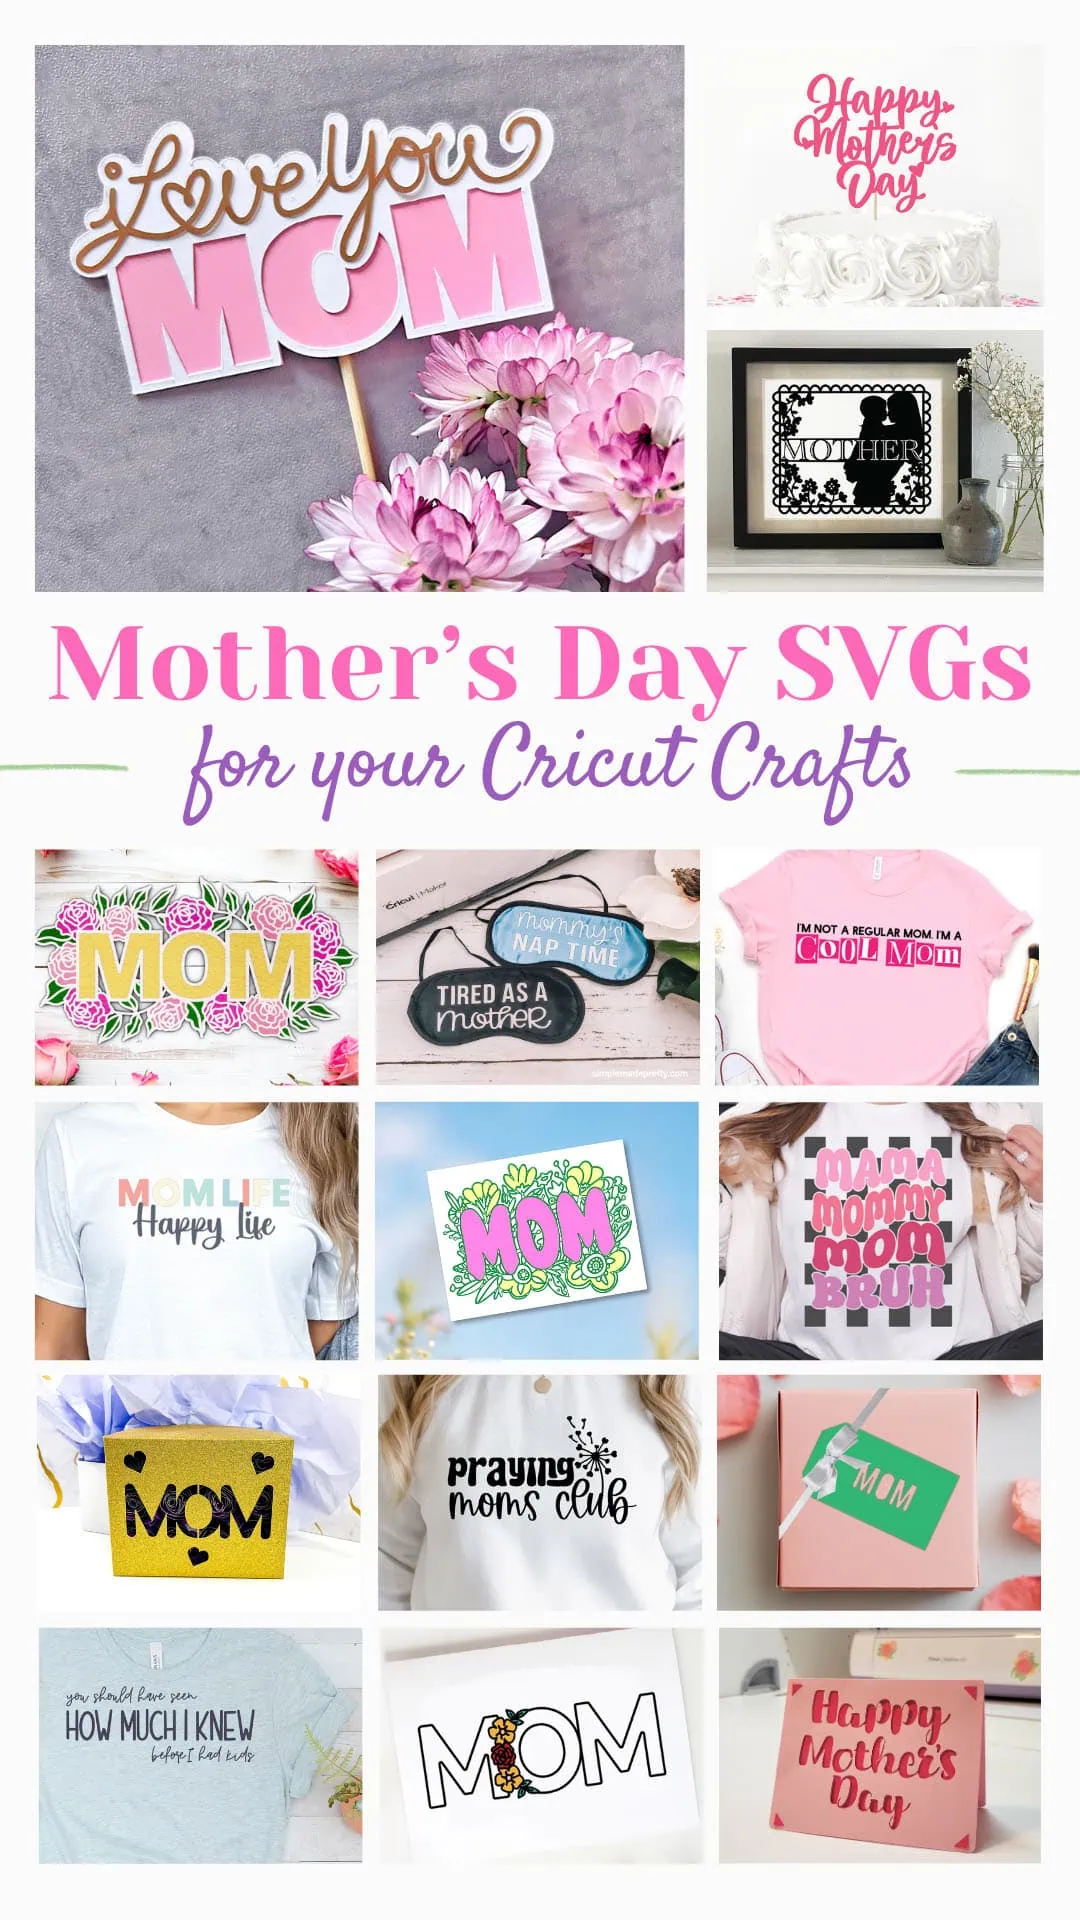 Mother's Day SVG files for handmade gifts